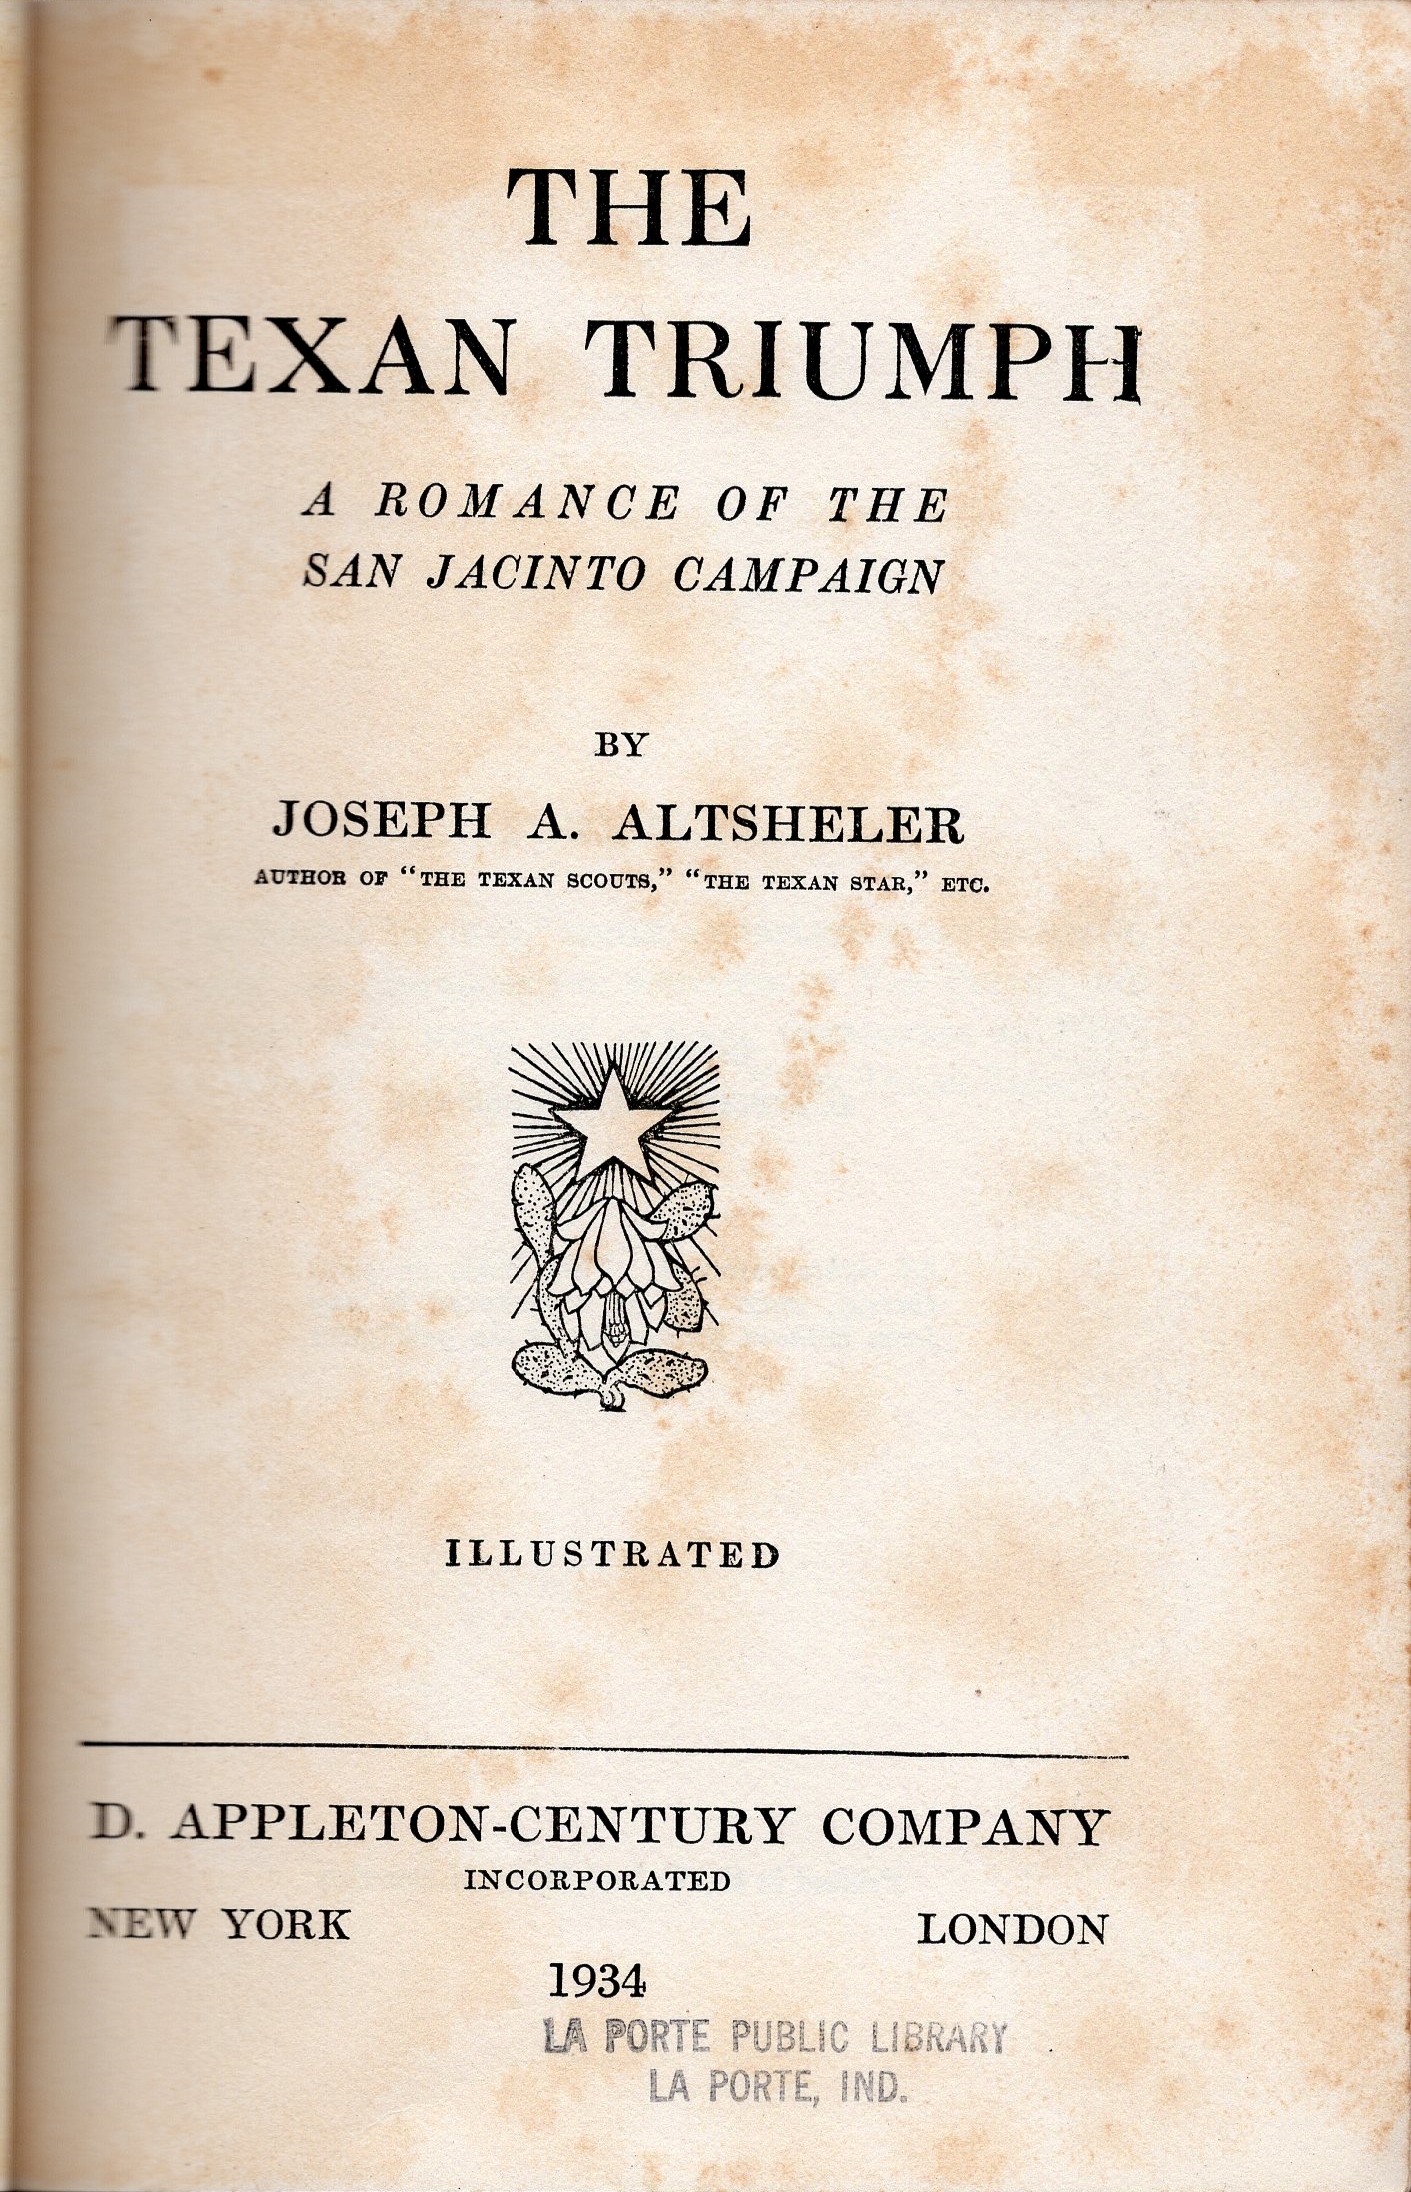 Title Page of 1934 Edition of The Texan Triumph